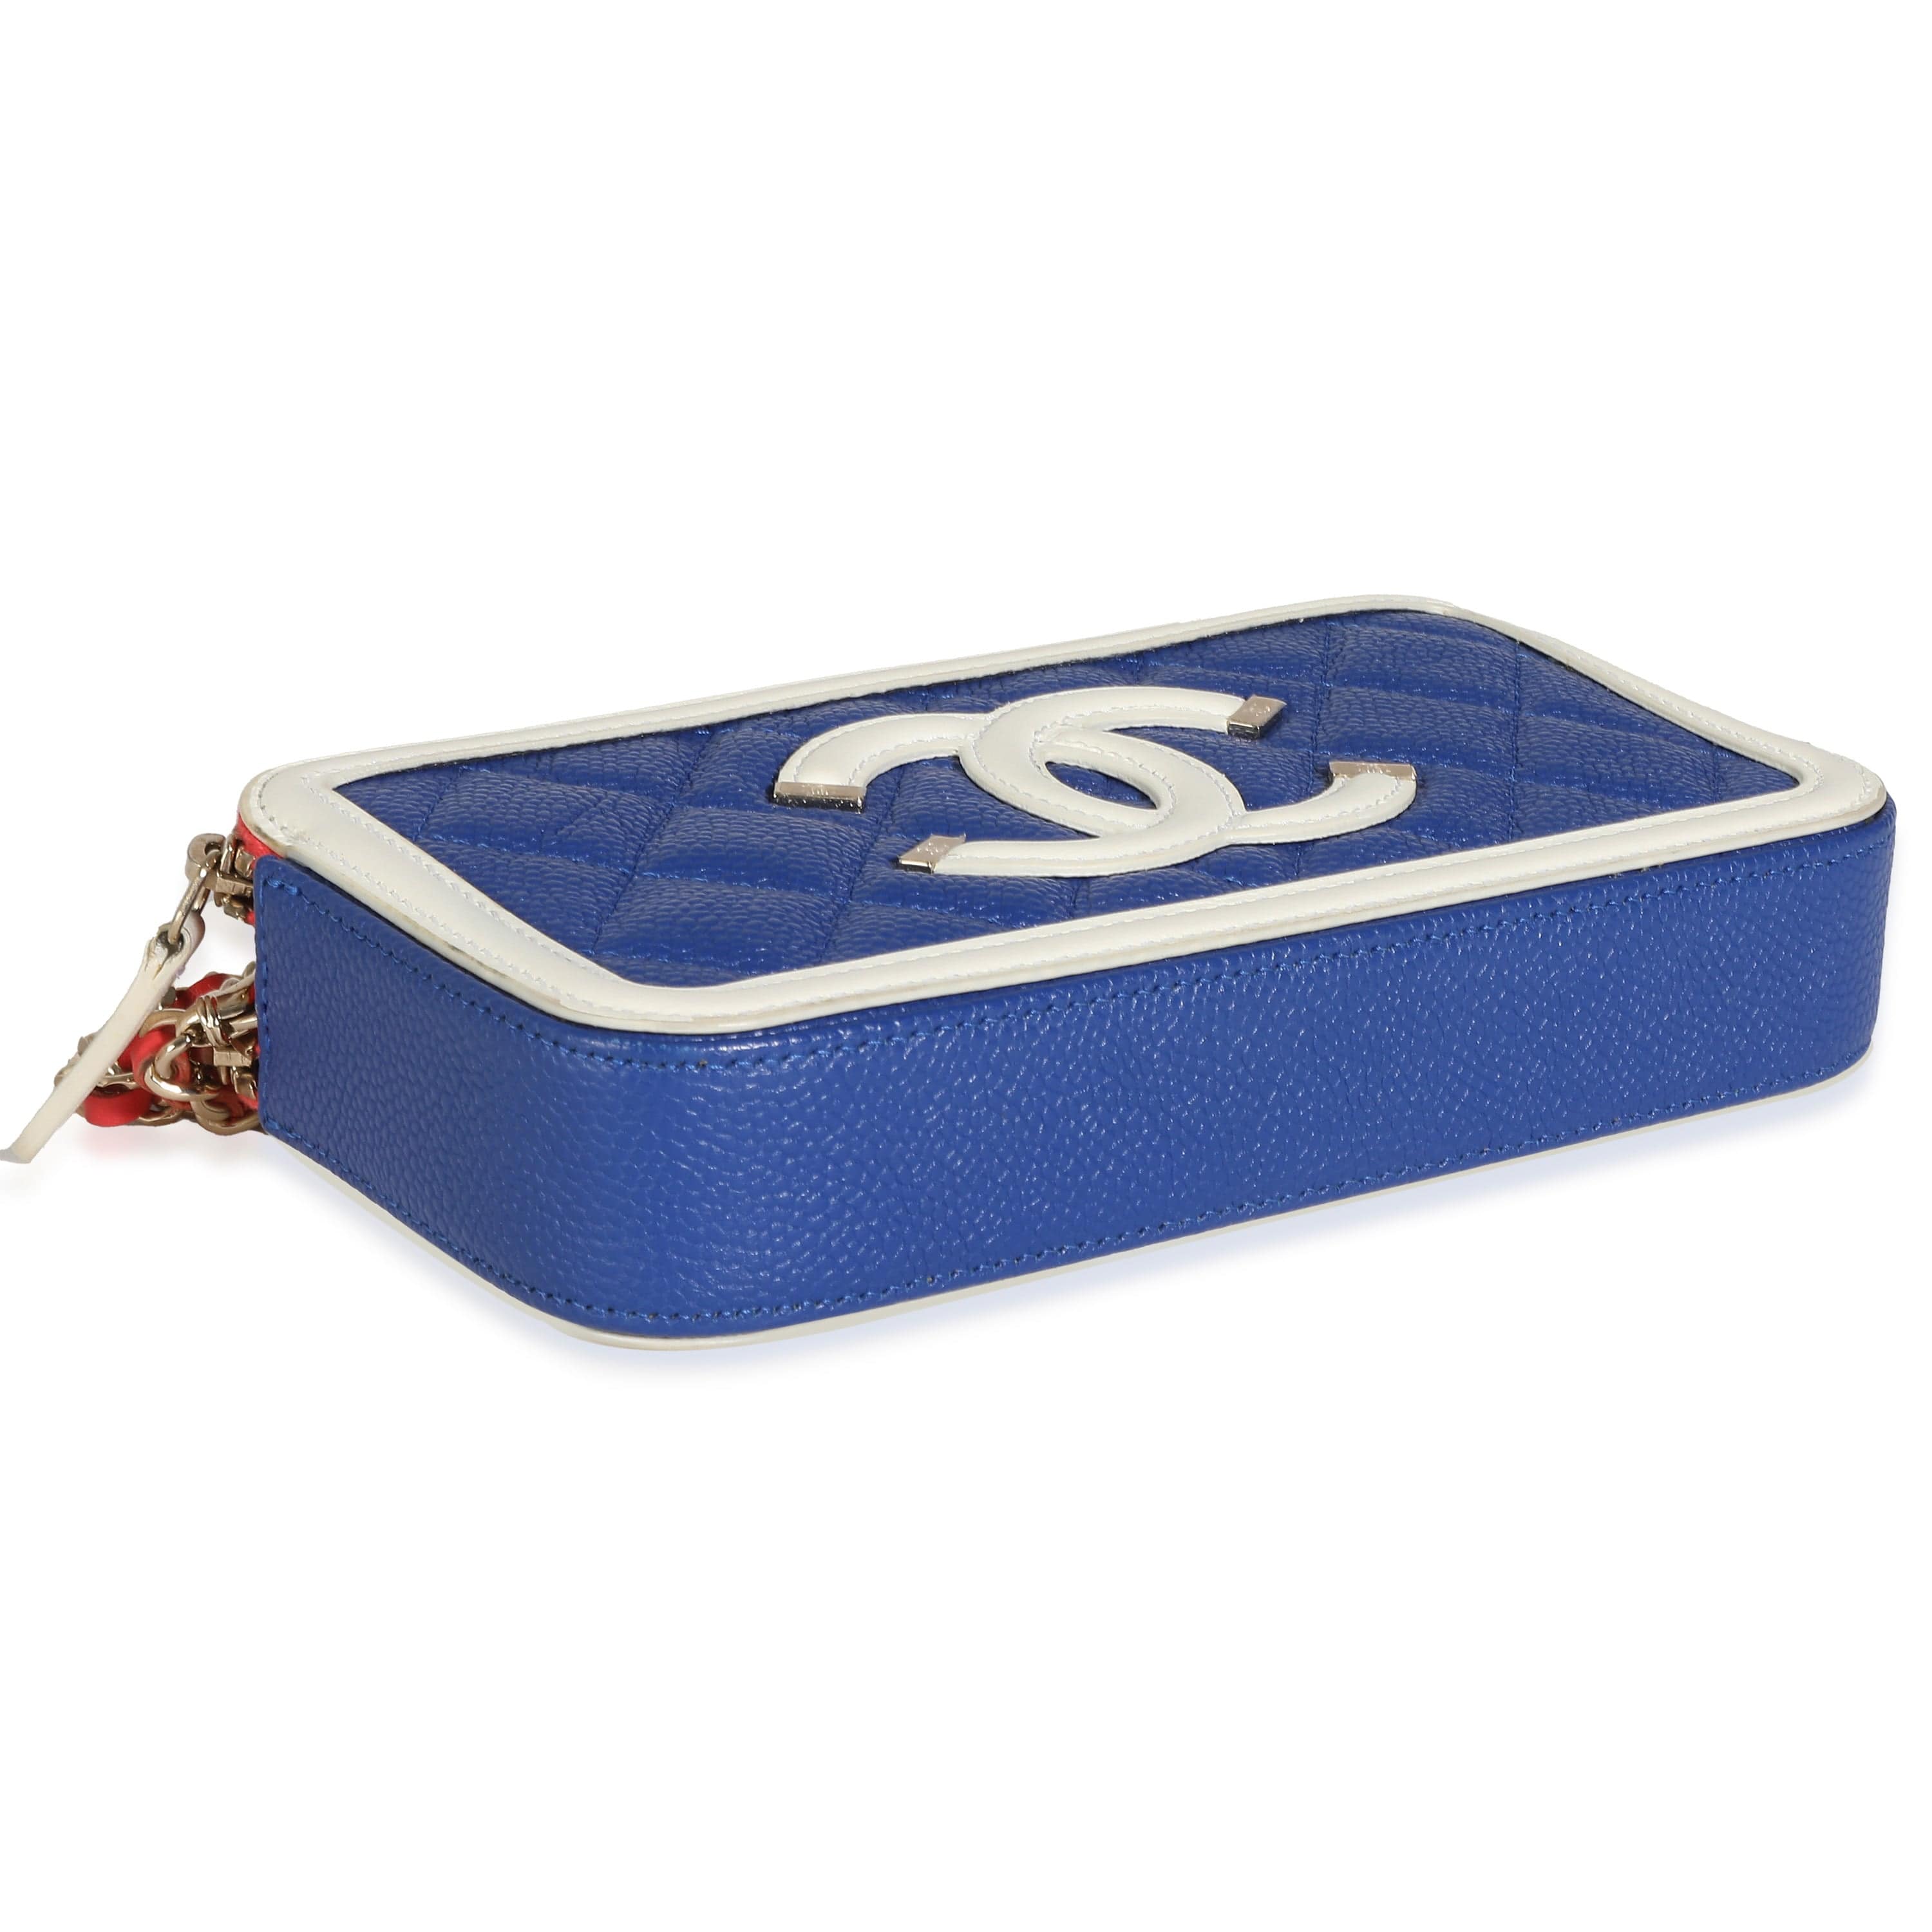 Chanel Chanel Blue White Red Quilted Caviar Double Zip Filigree Clutch